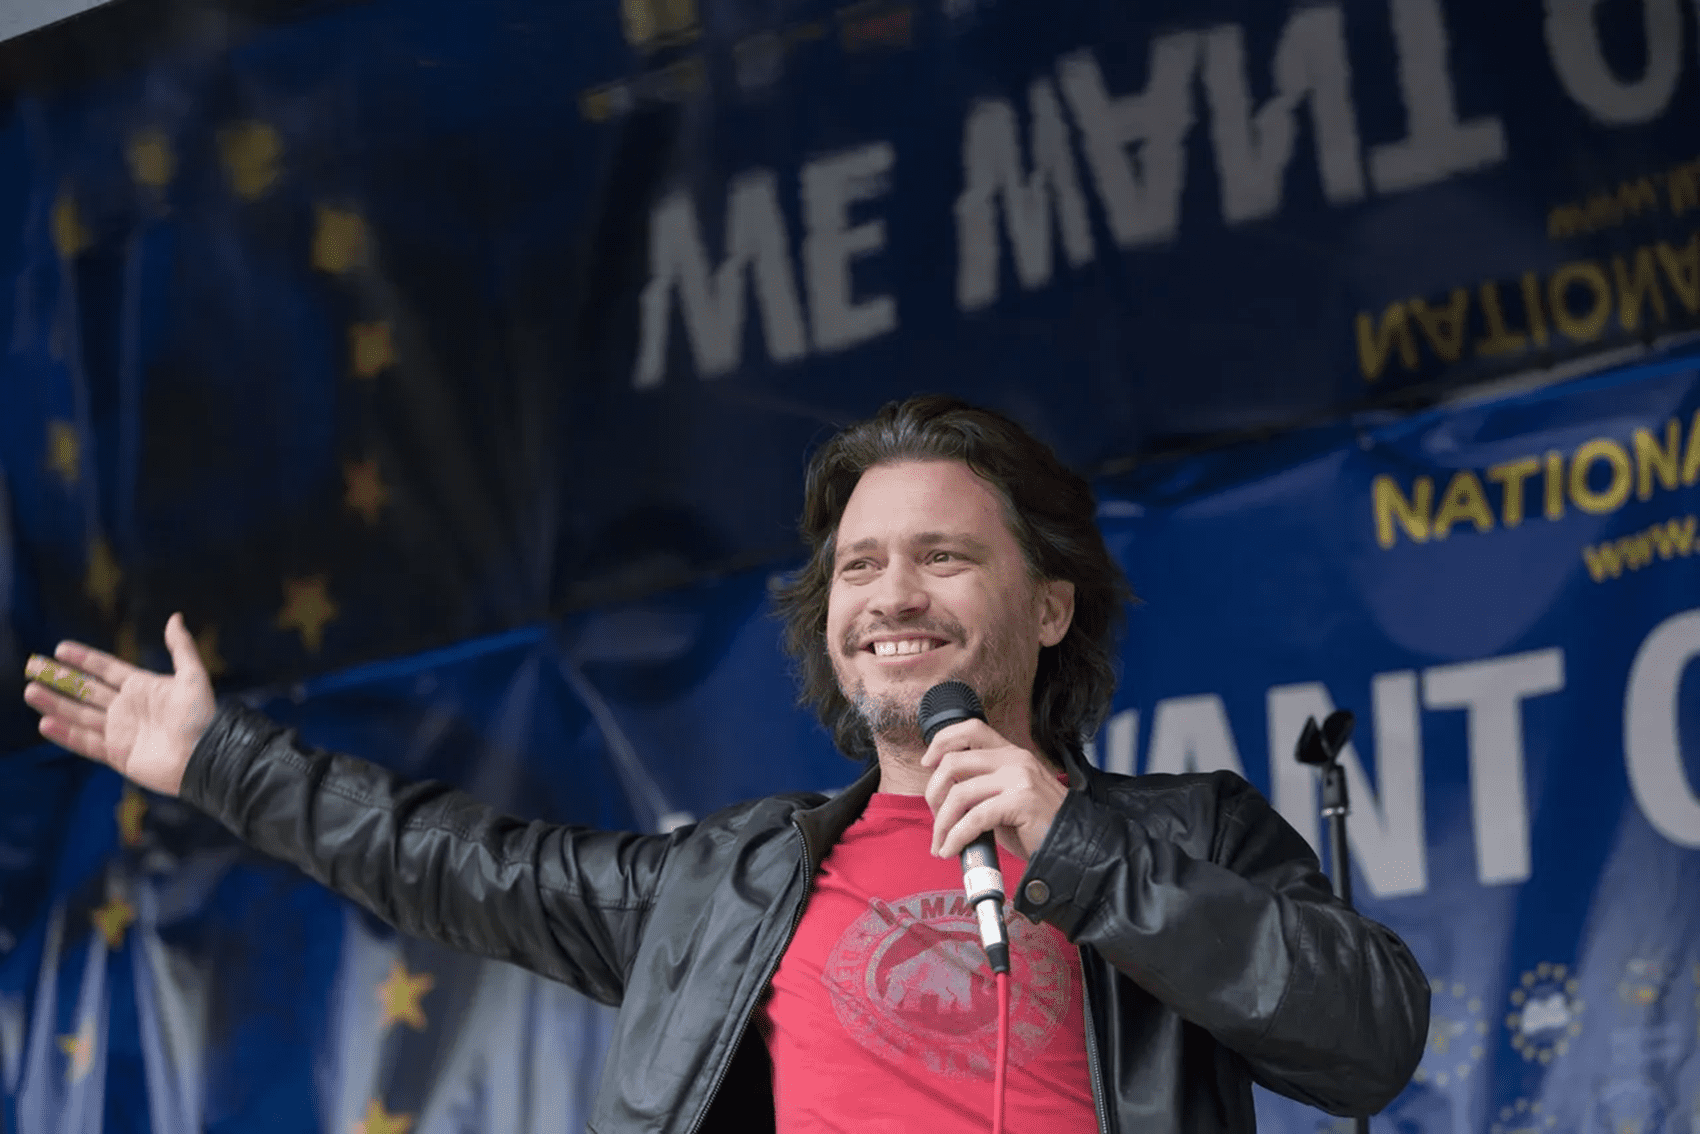 Mike Galsworthy elected as the new chair of European Movement UK